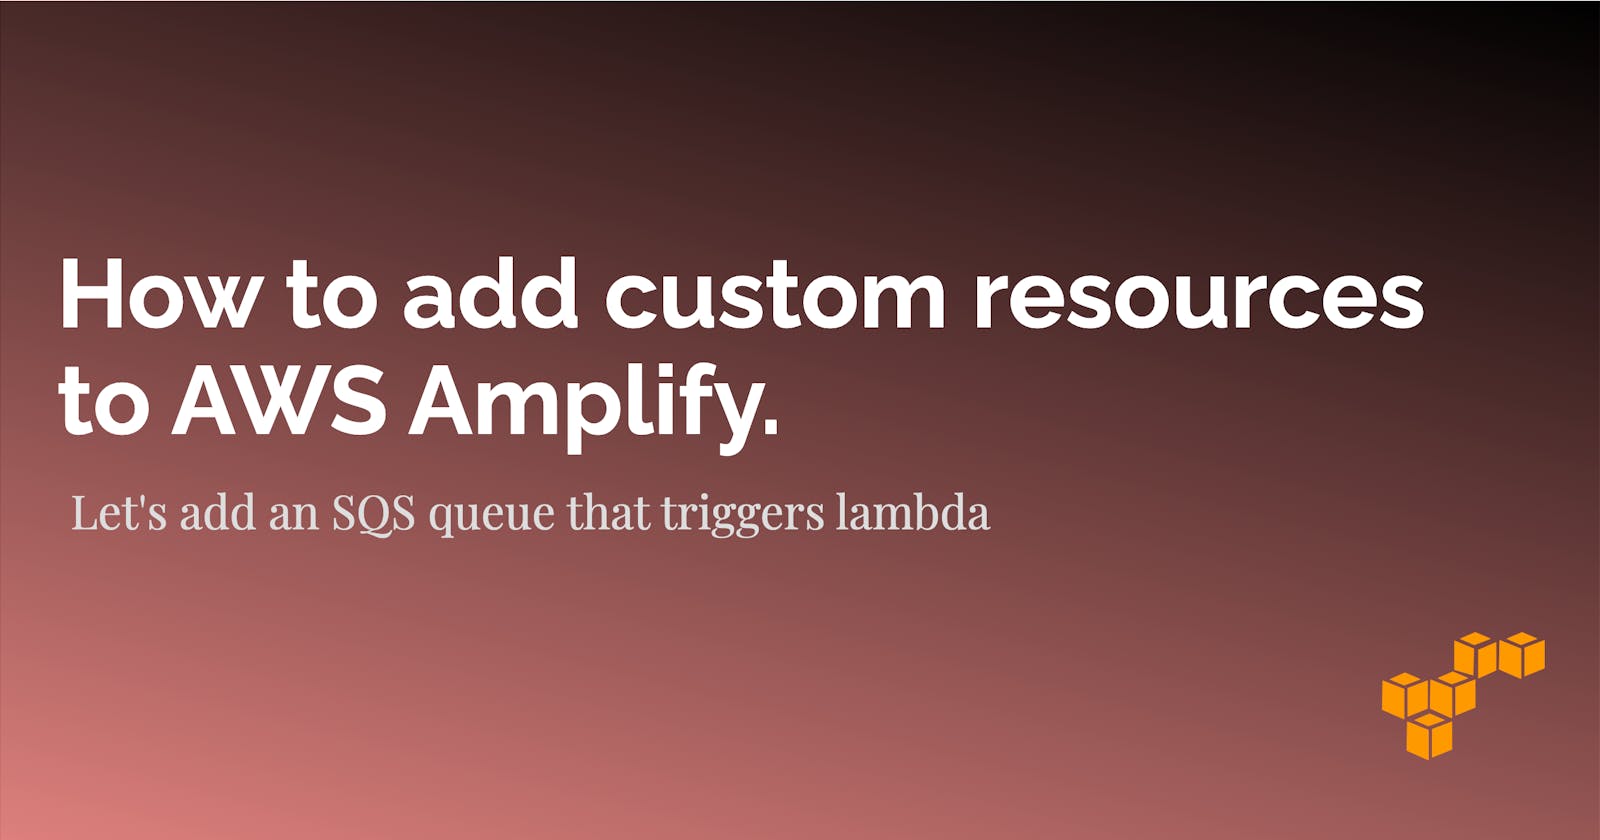 How to add custom resources to AWS Amplify. Add an SQS queue that triggers lambda.